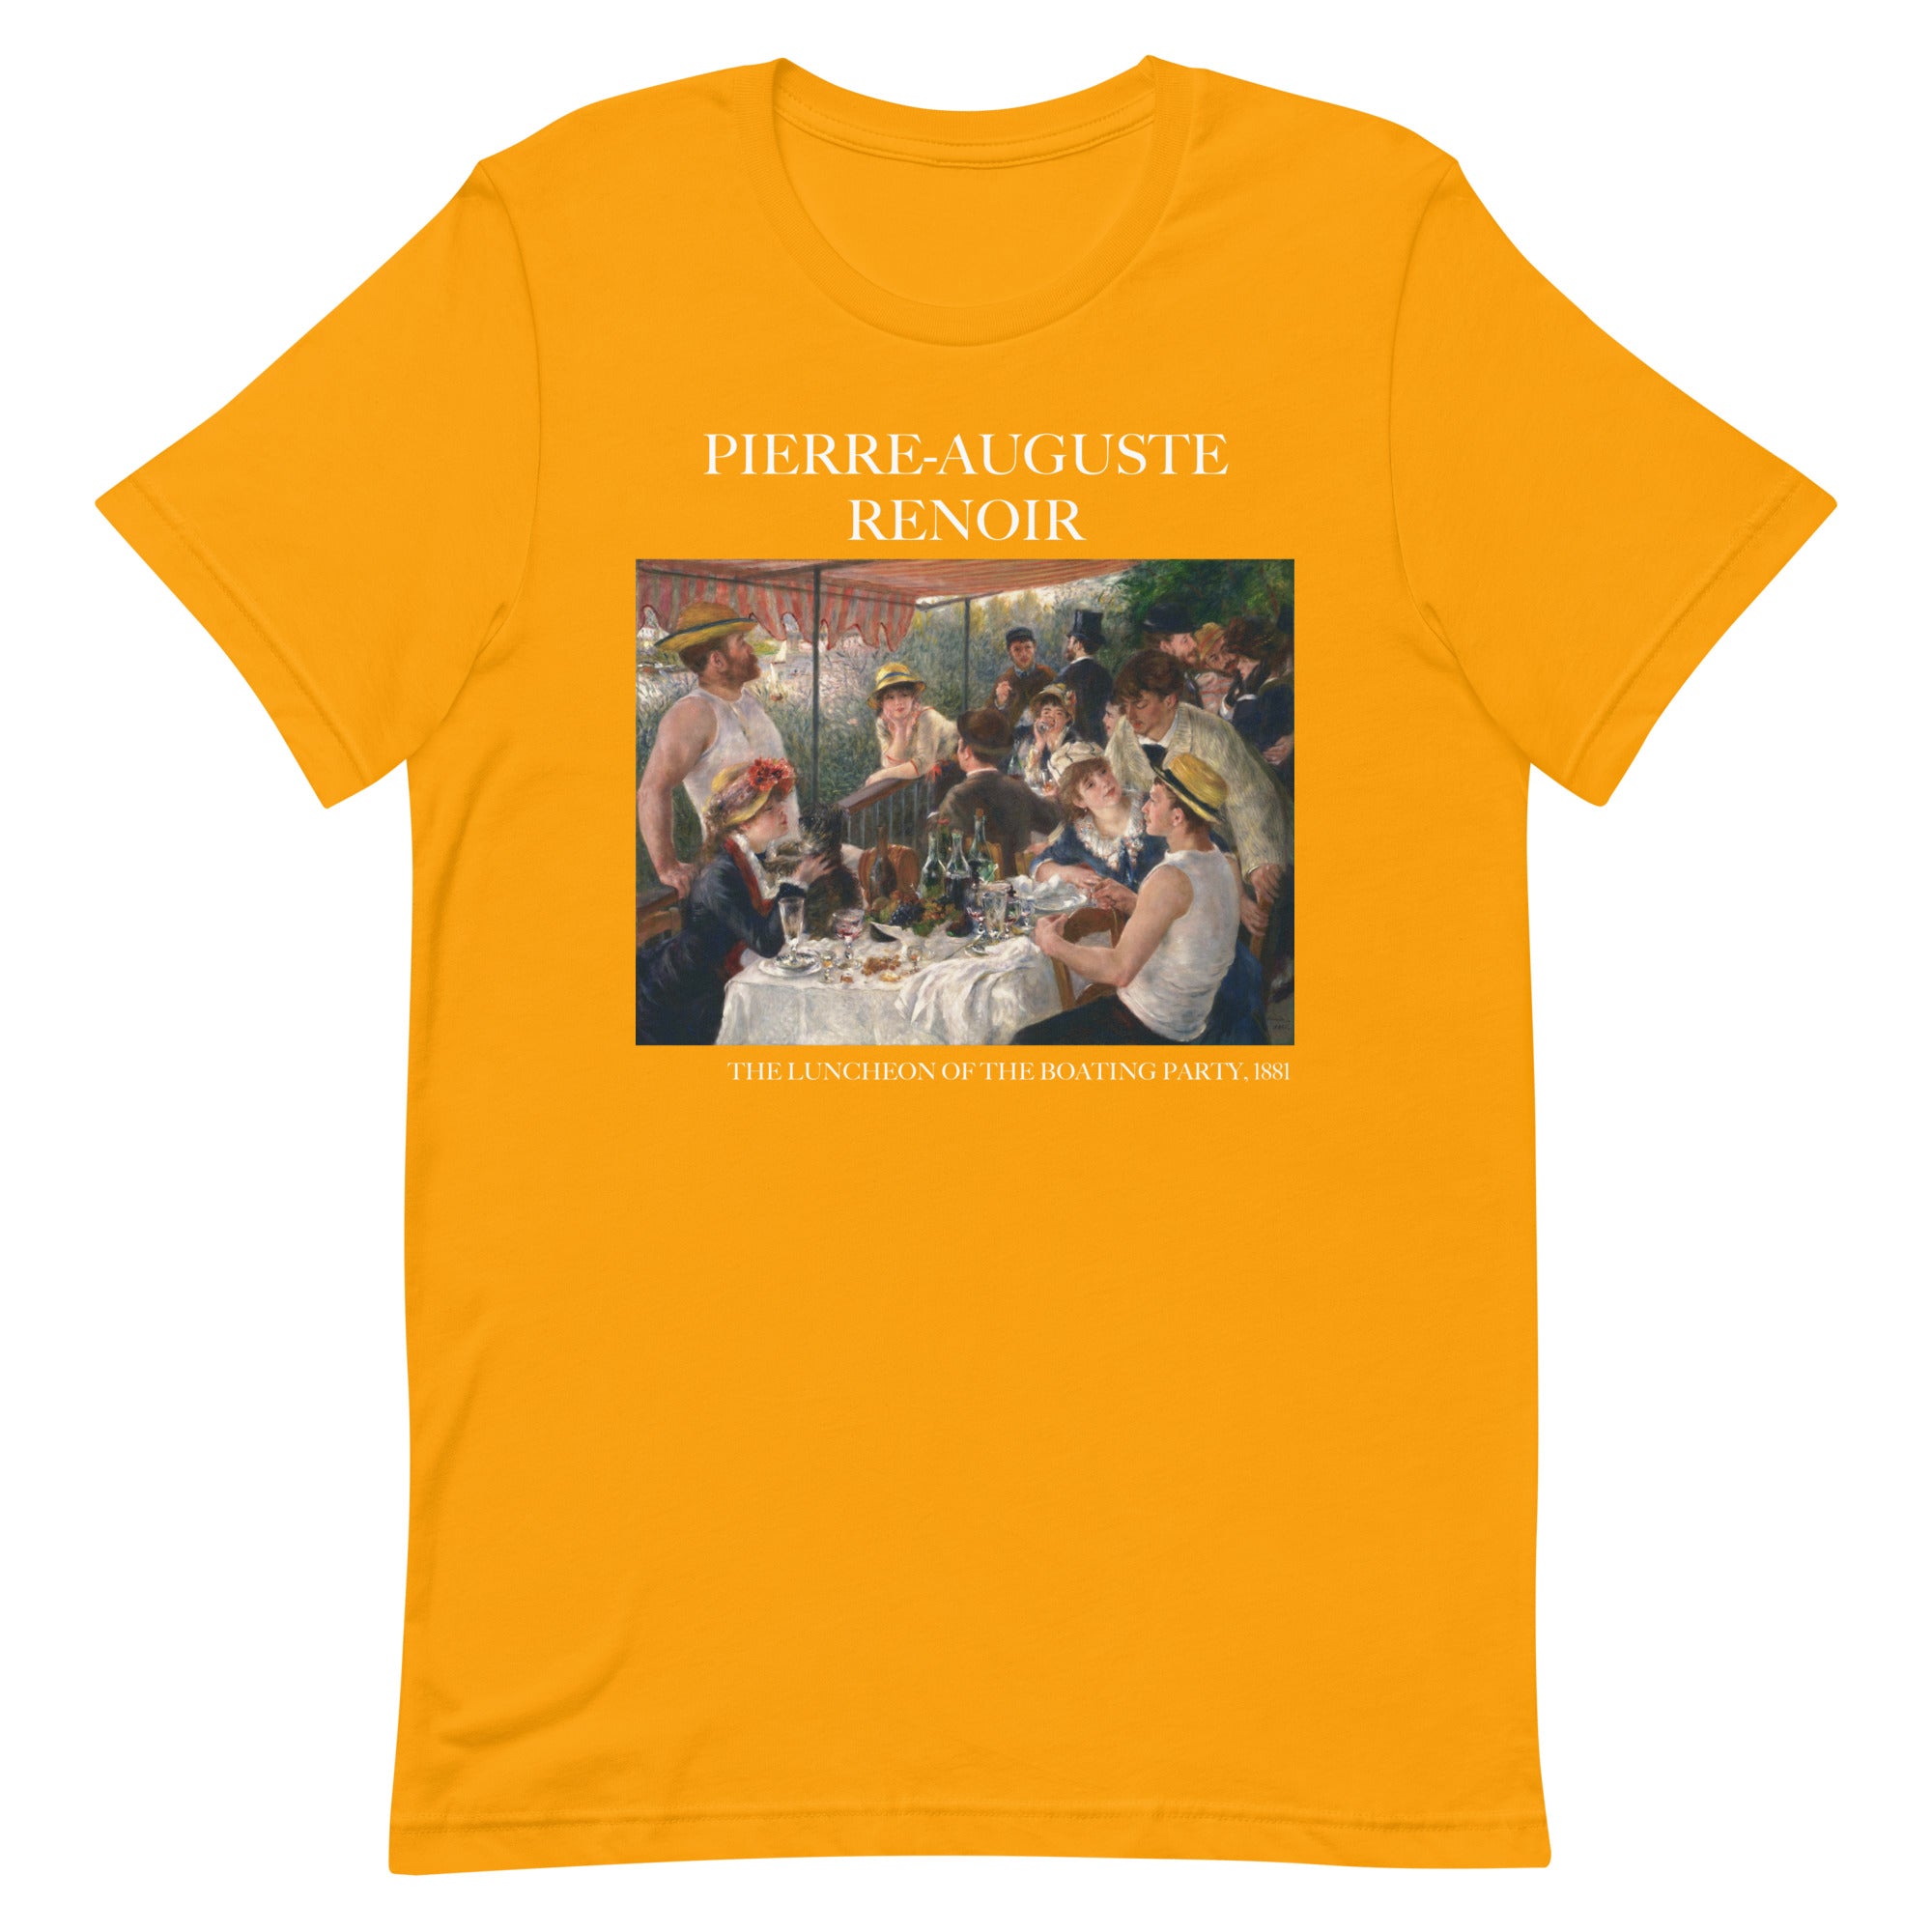 Pierre-Auguste Renoir 'The Luncheon of the Boating Party' Famous Painting T-Shirt | Unisex Classic Art Tee